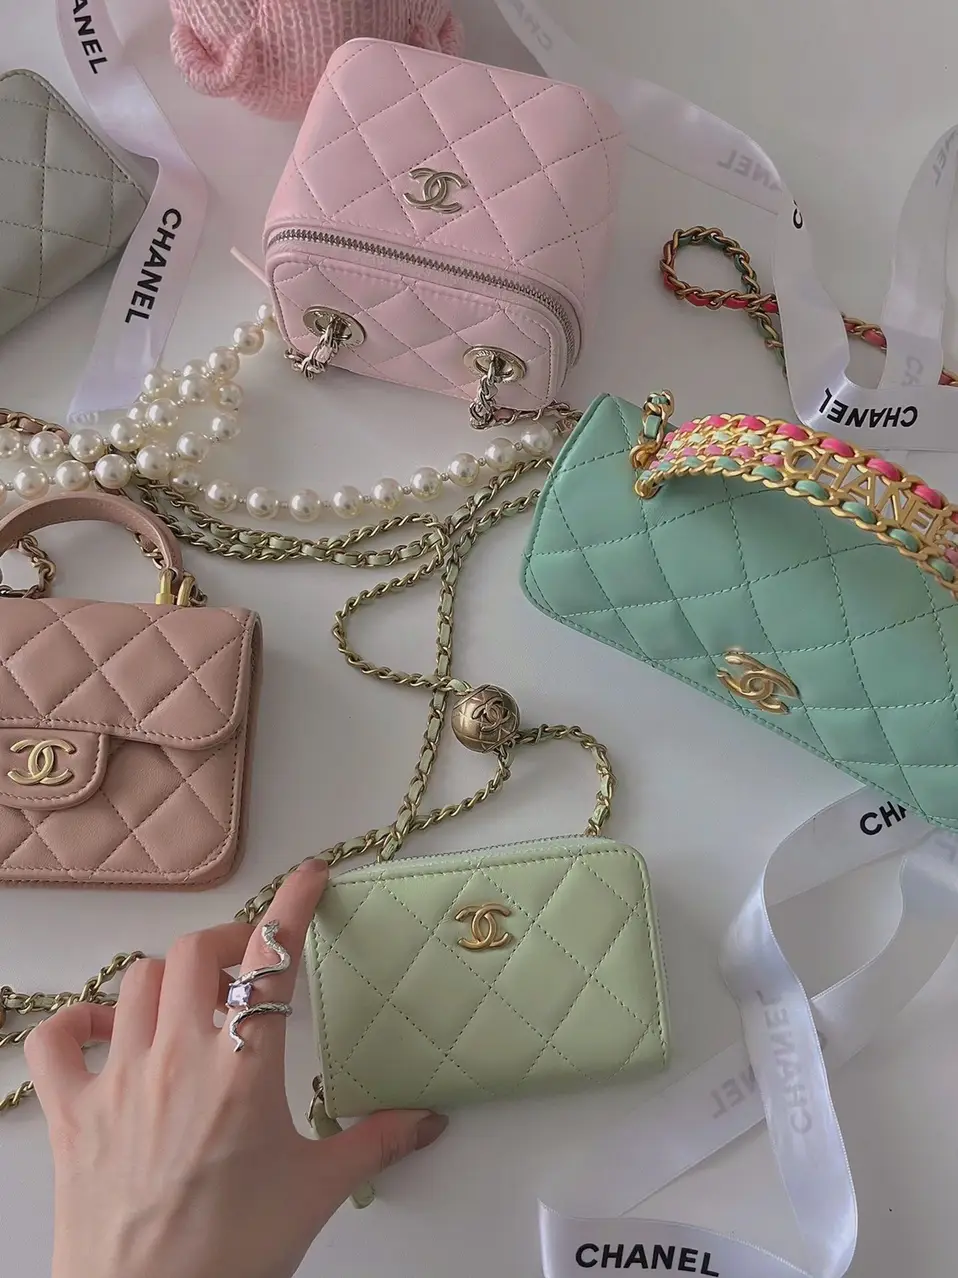 CHANEL bag, Summer ice cream color matching, Gallery posted by LUNA